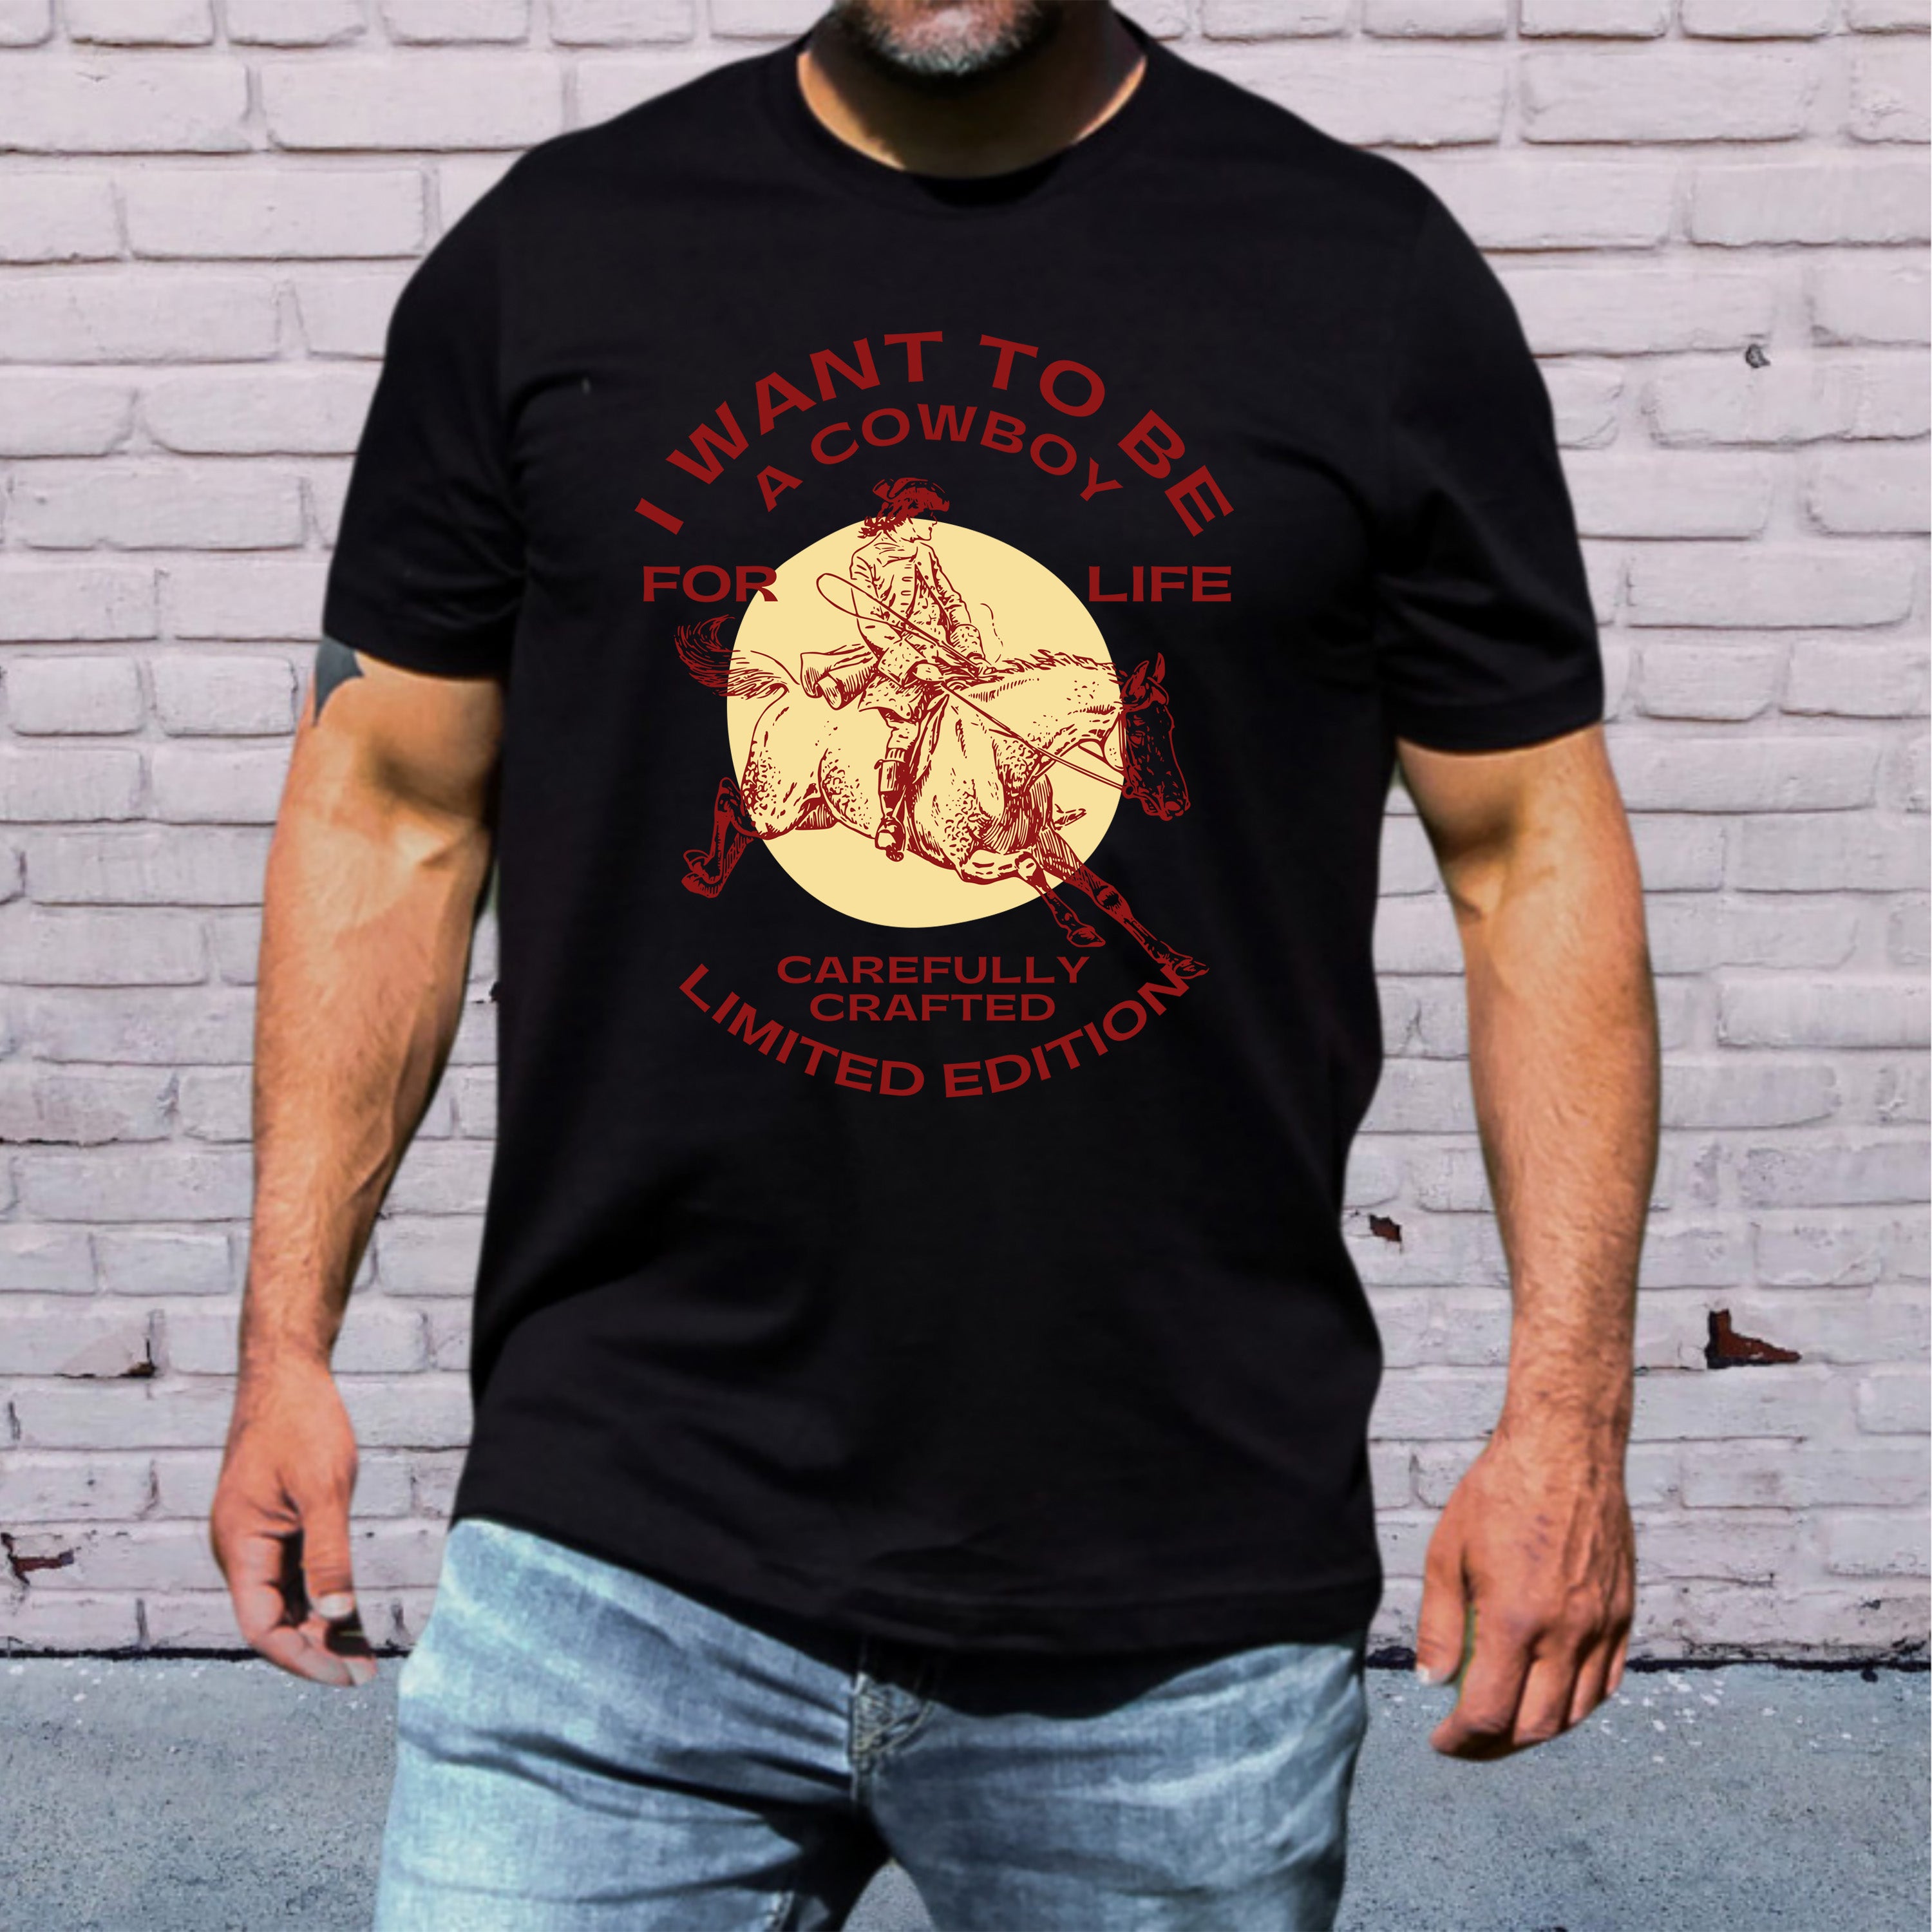 I Want To Be A Cowboy - Men's Tee